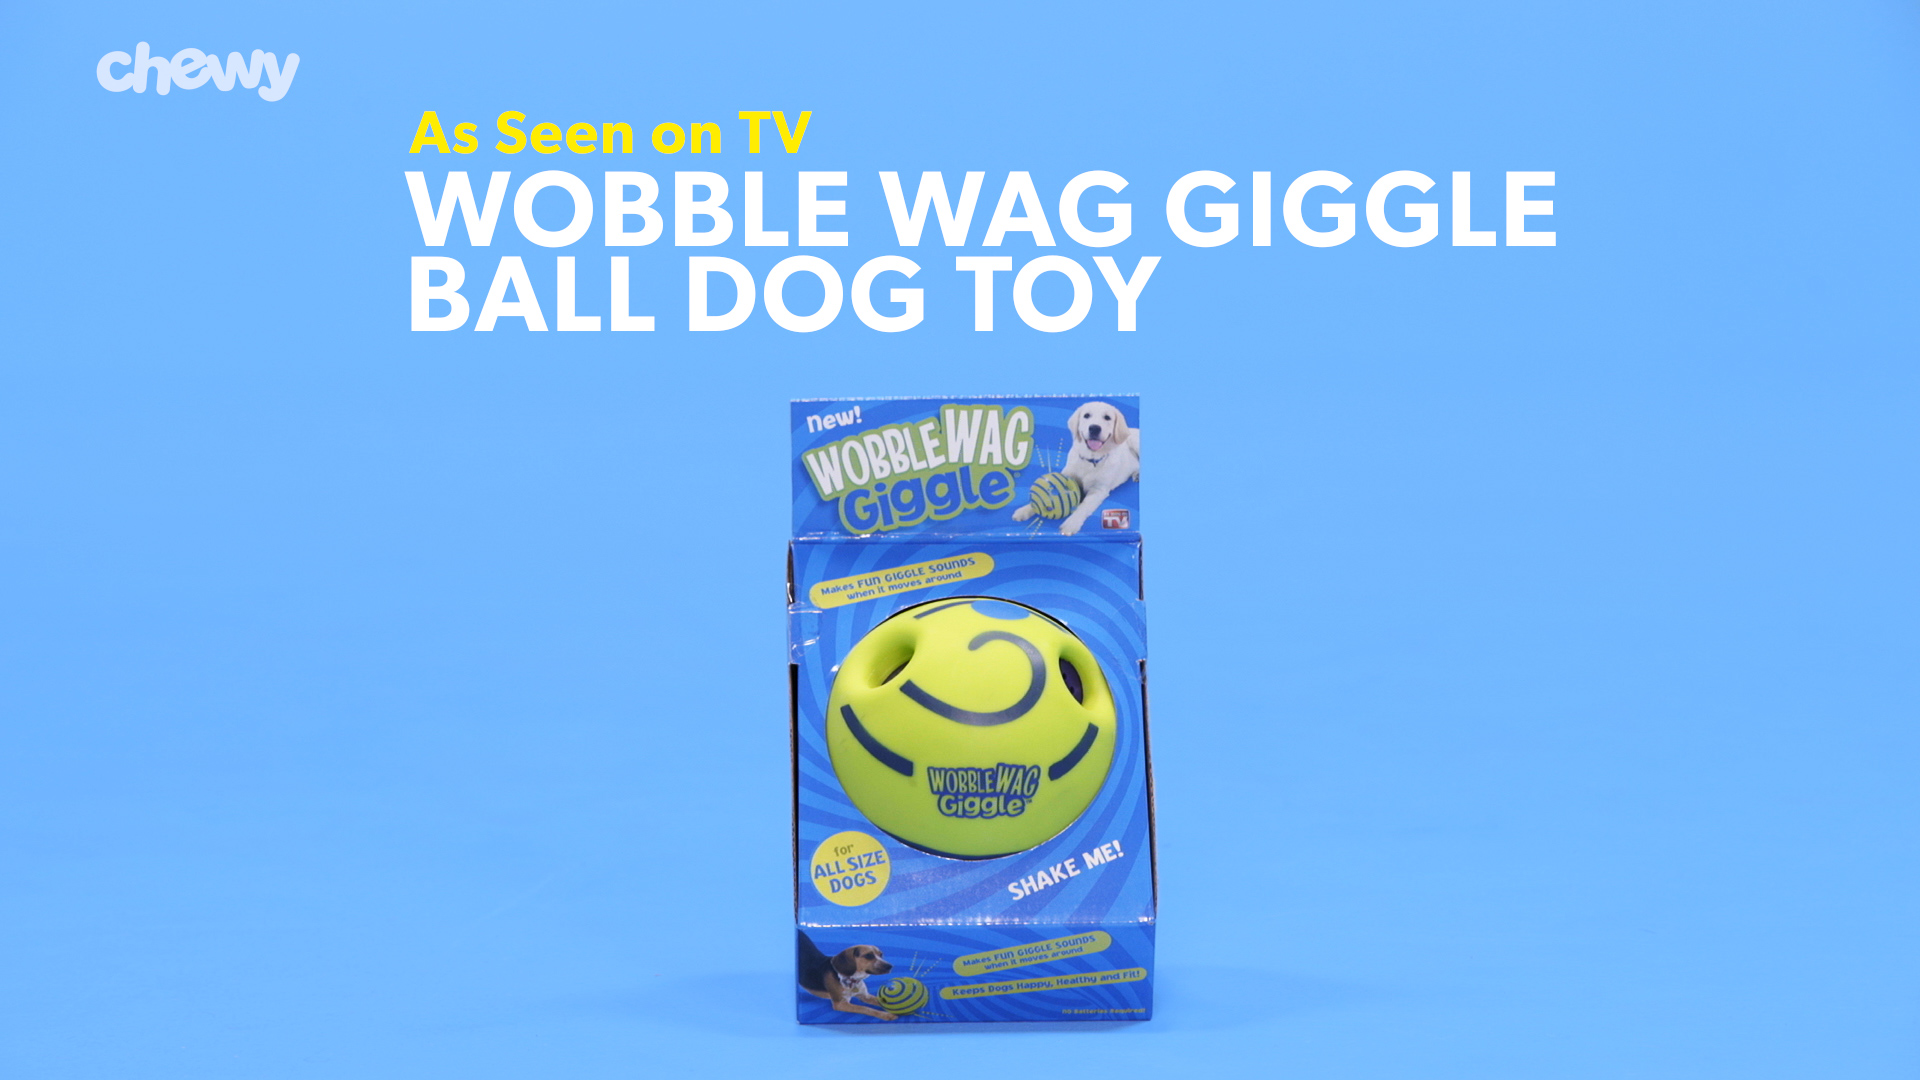 wiggly giggly dog toy